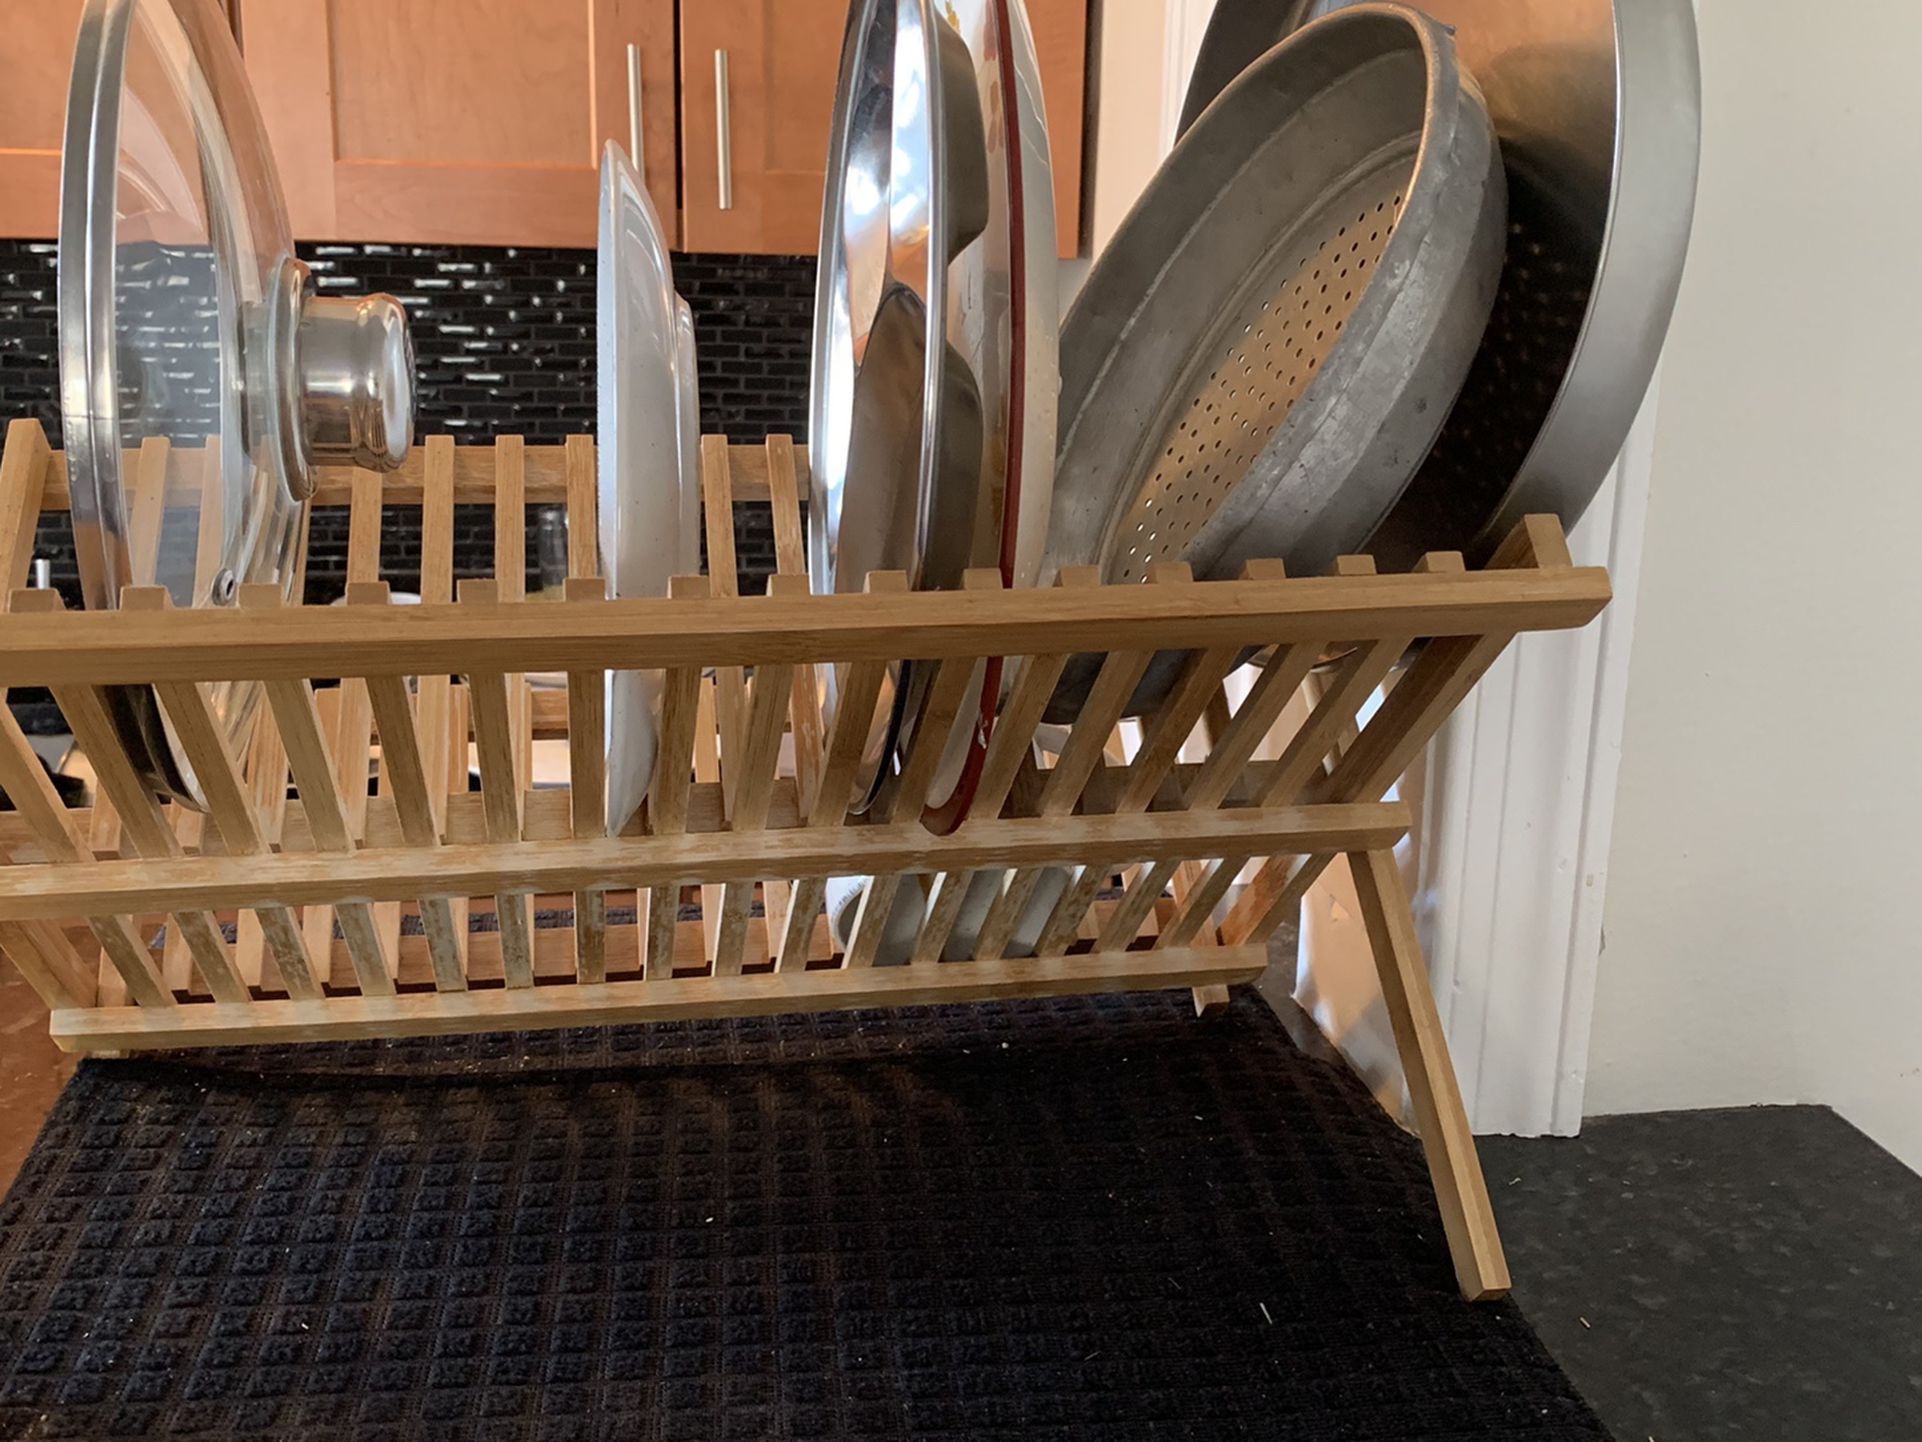 Wooden sturdy dish drying rack stand with dish drying mat